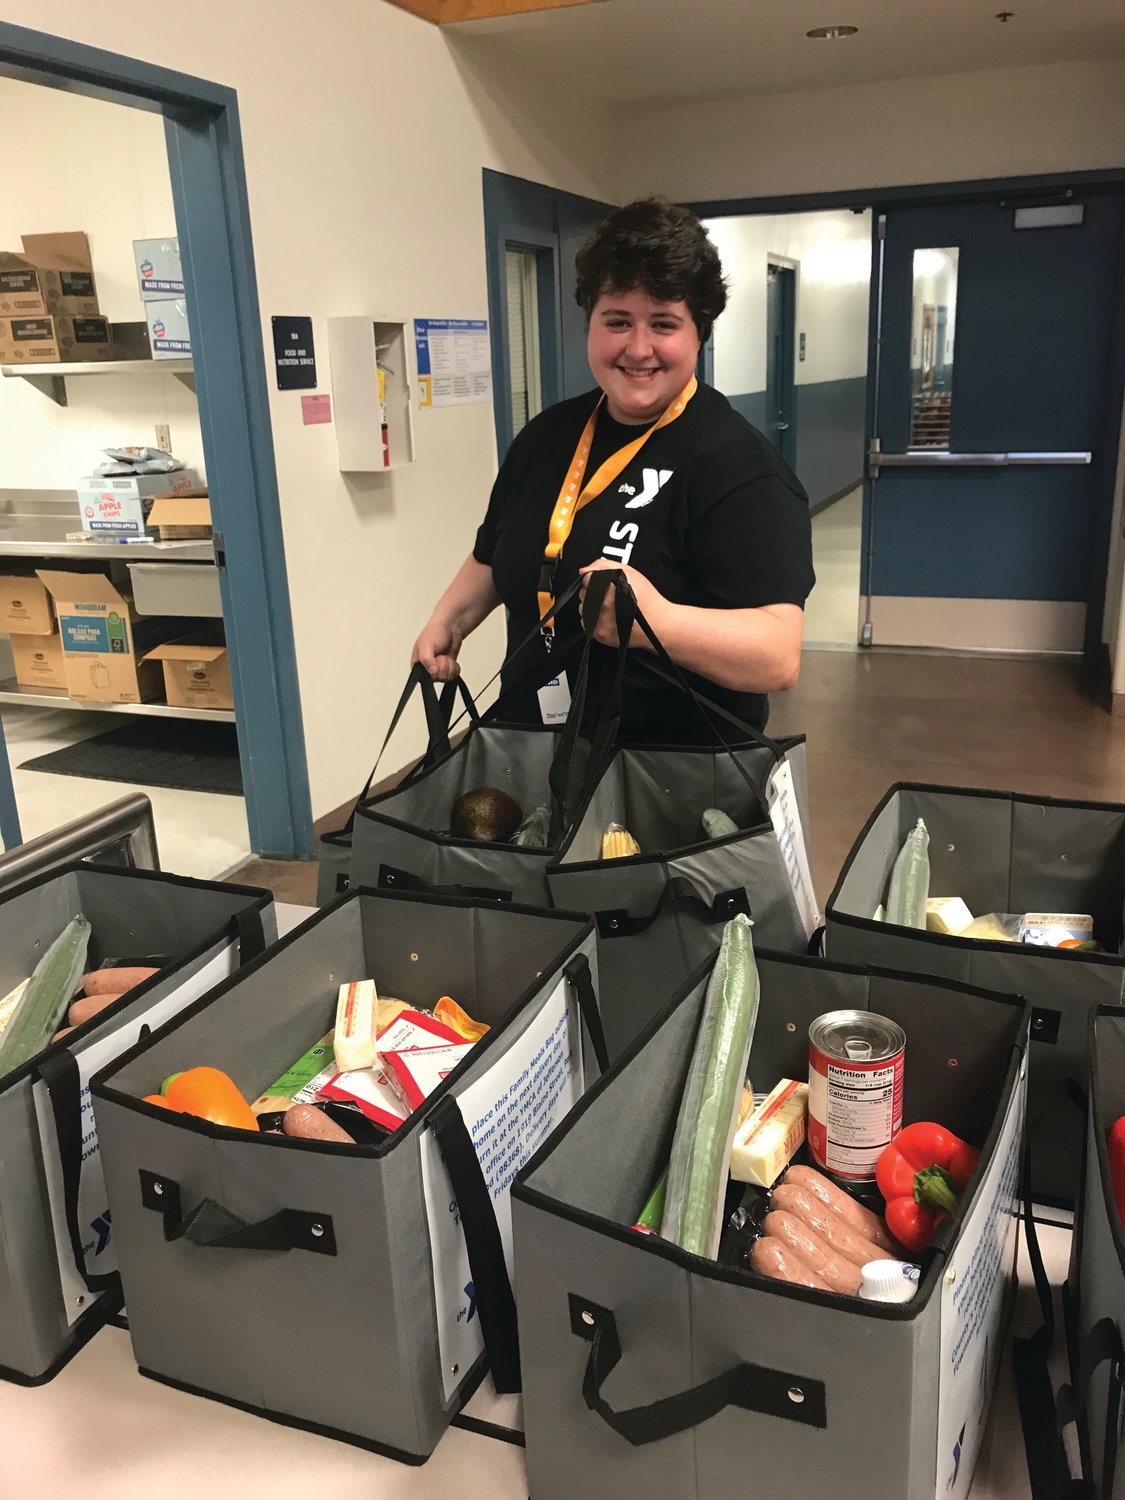 Sarah Henry of the YMCA packs bags of food for children and teens in Jefferson County. The YMCA supplies meals for the youth of Jefferson County during summer months when kids are out of classrooms.